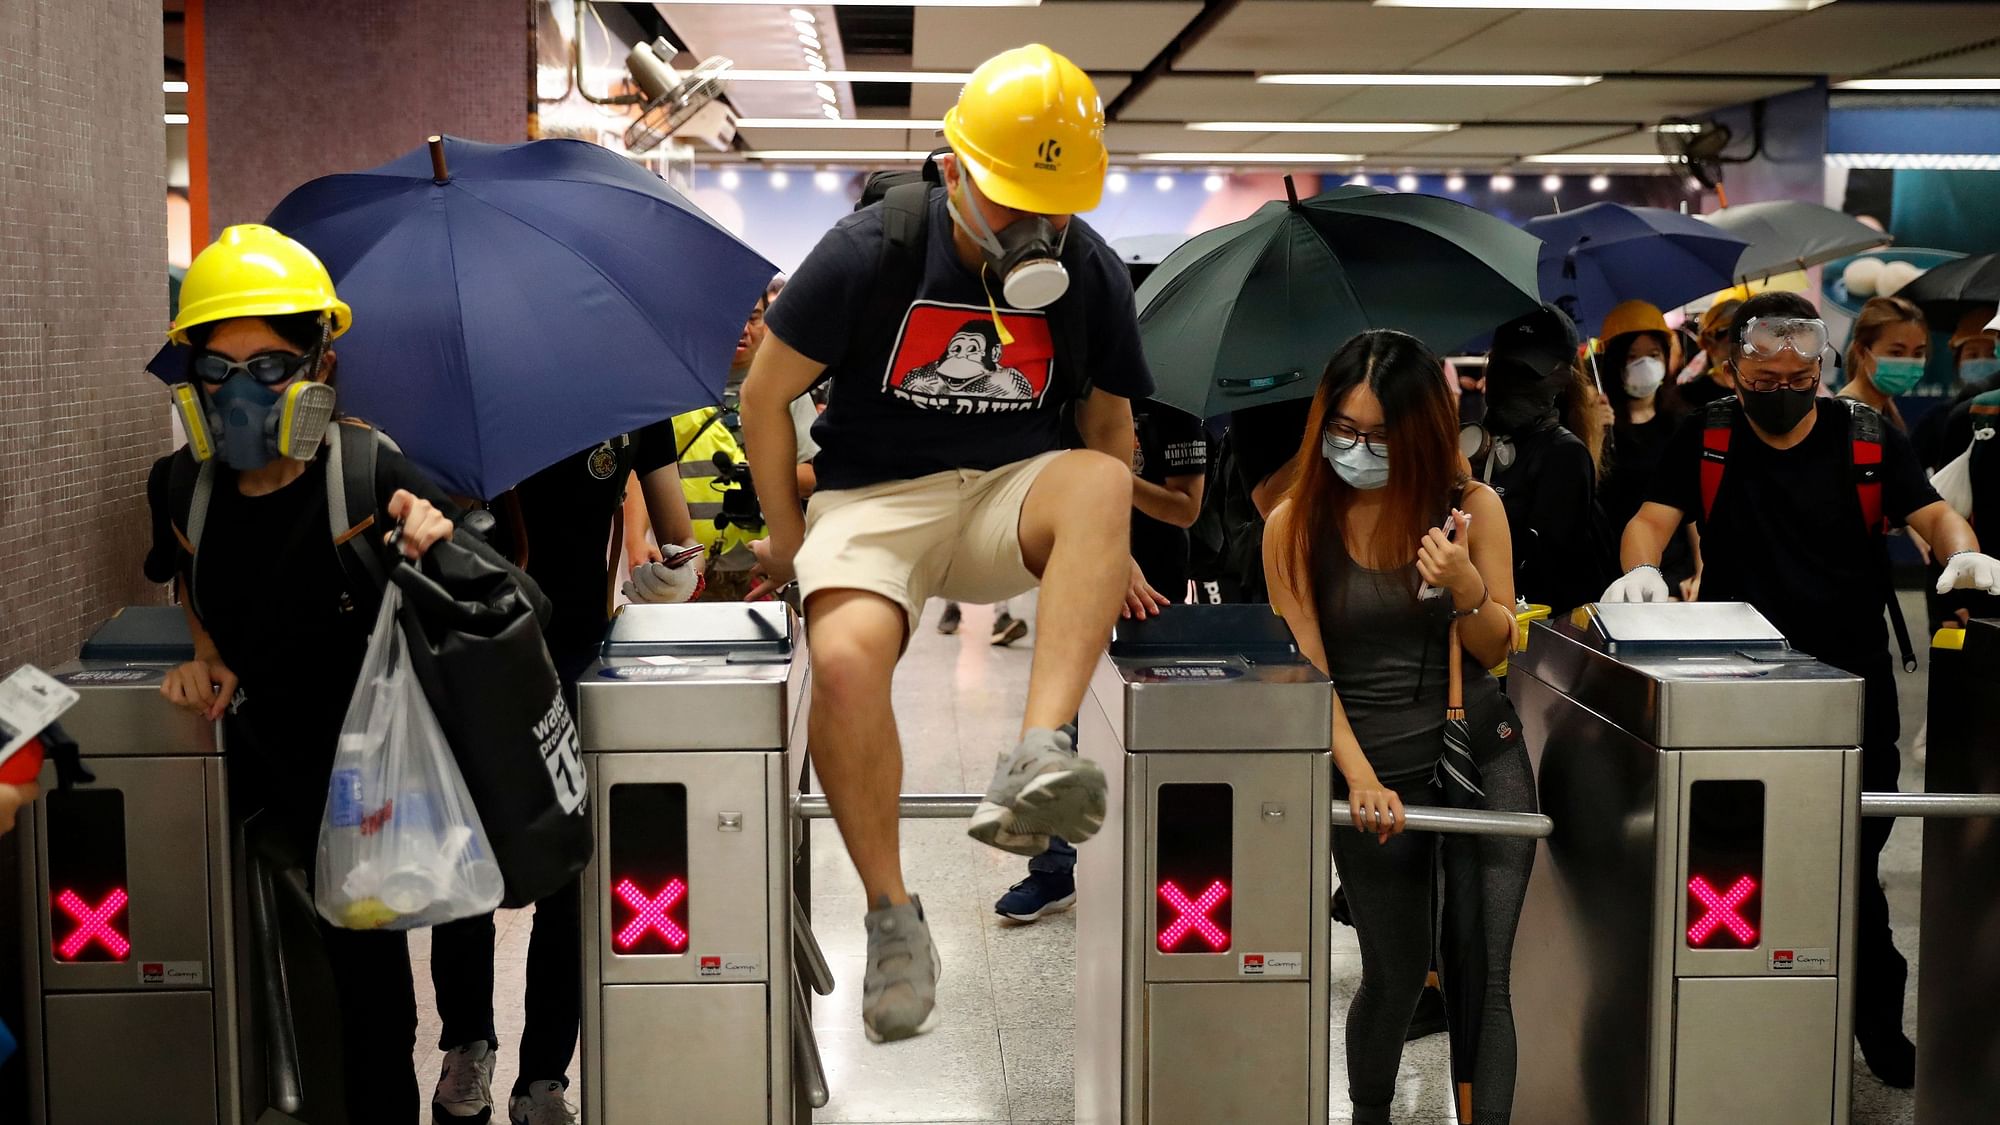 A protester jumps over the gate as protesters exit the Causeway Bay MTR station as they proceed to the anti-extradition bill protest destination, in Hong Kong on Sunday, 4 August.